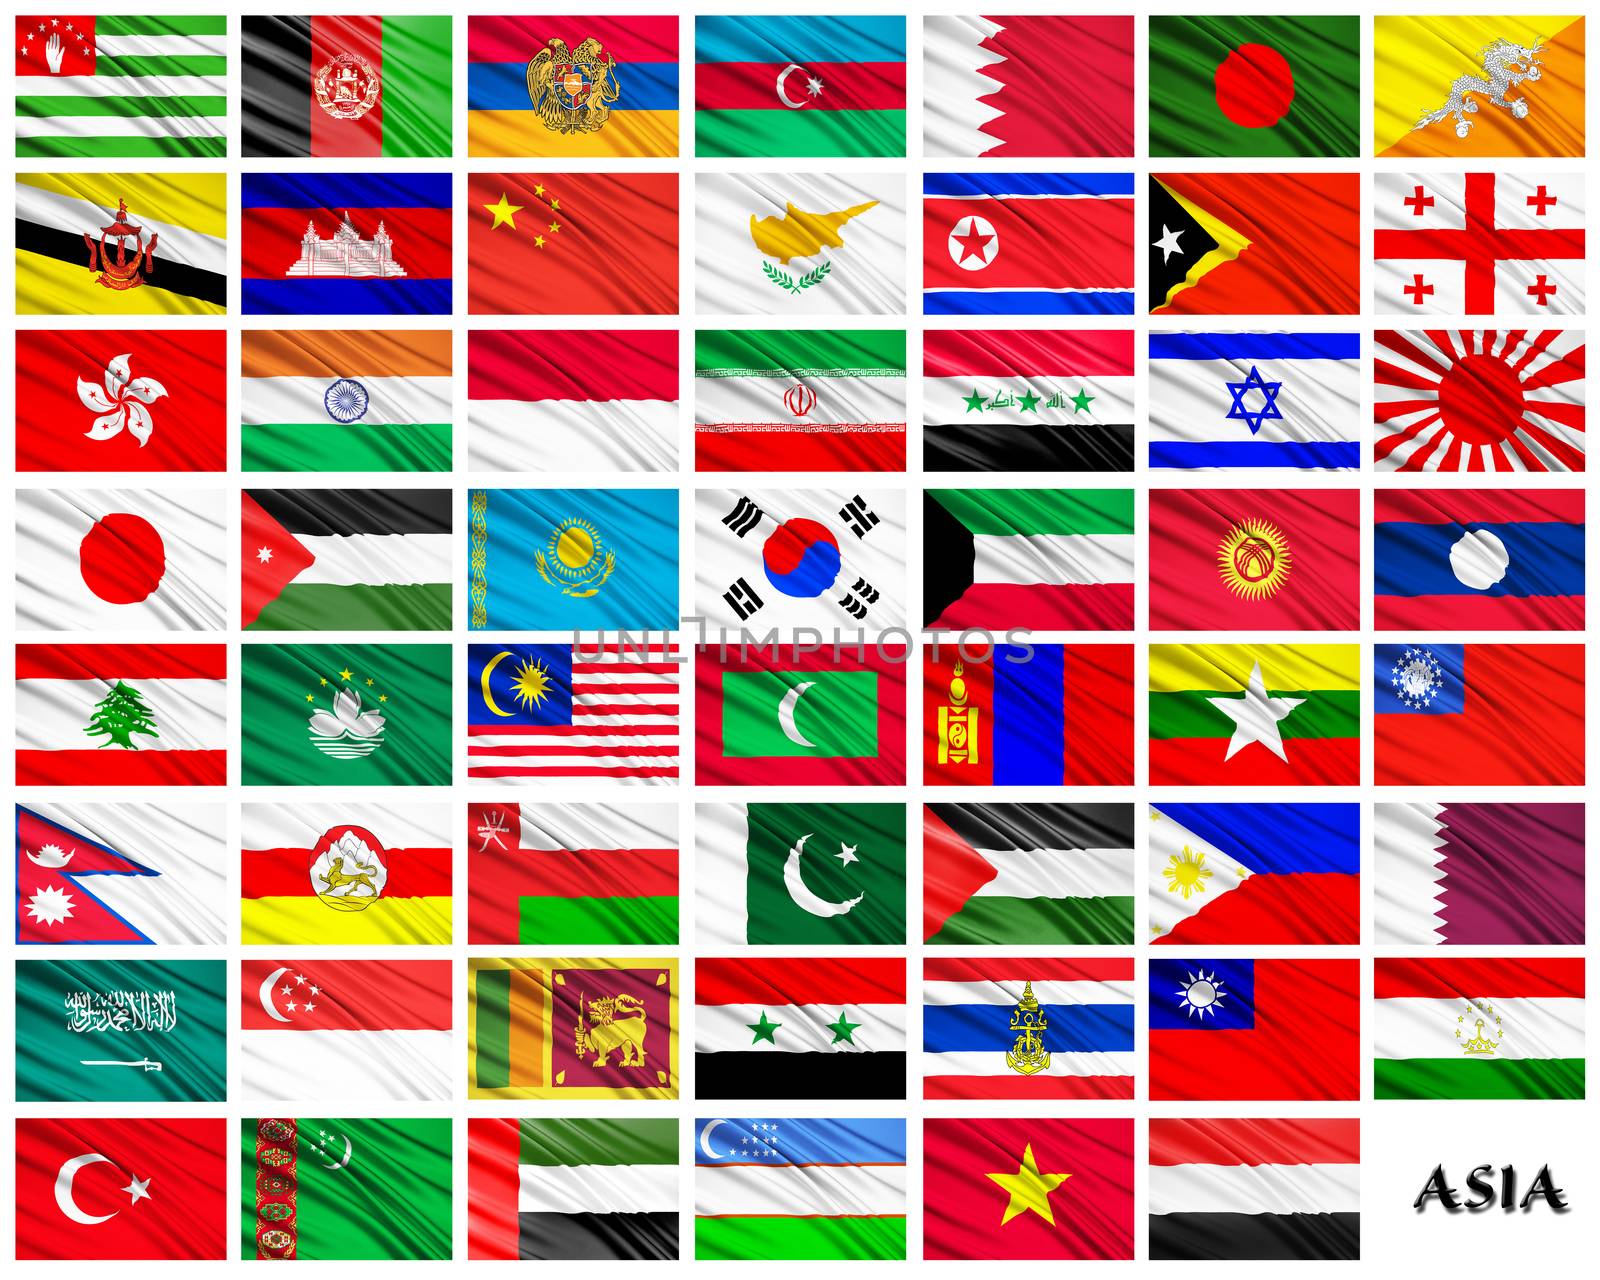 Flags of Asian countries in alphabetical order on a white background